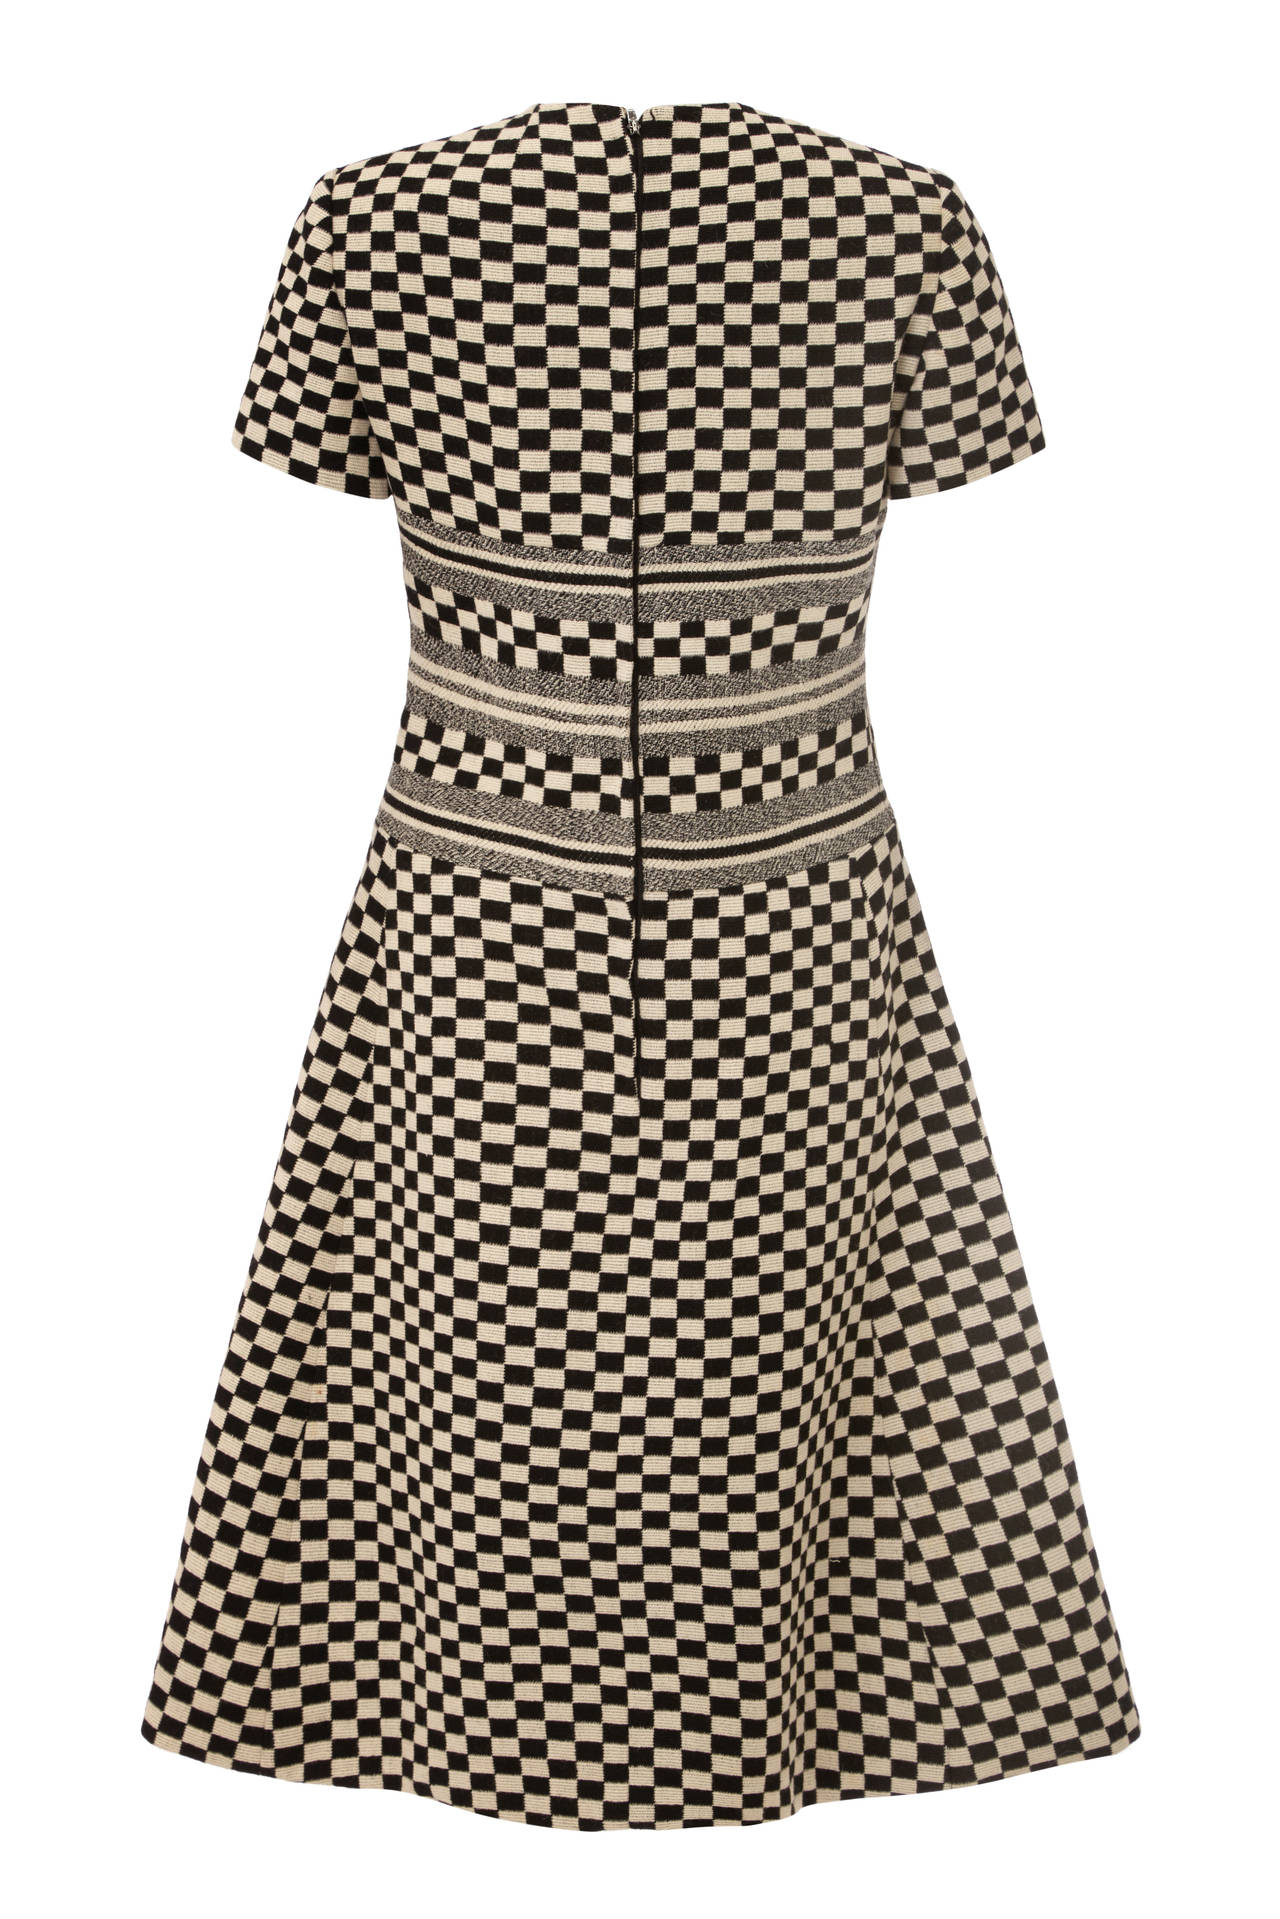 Fantastic black and white checked dress from Doirling by Christian Dior. Typical of the style of the day this piece features three monochrome stripes to the bodice and pockets at the hips. It is fully lined, fastens at the back with a zip and is in